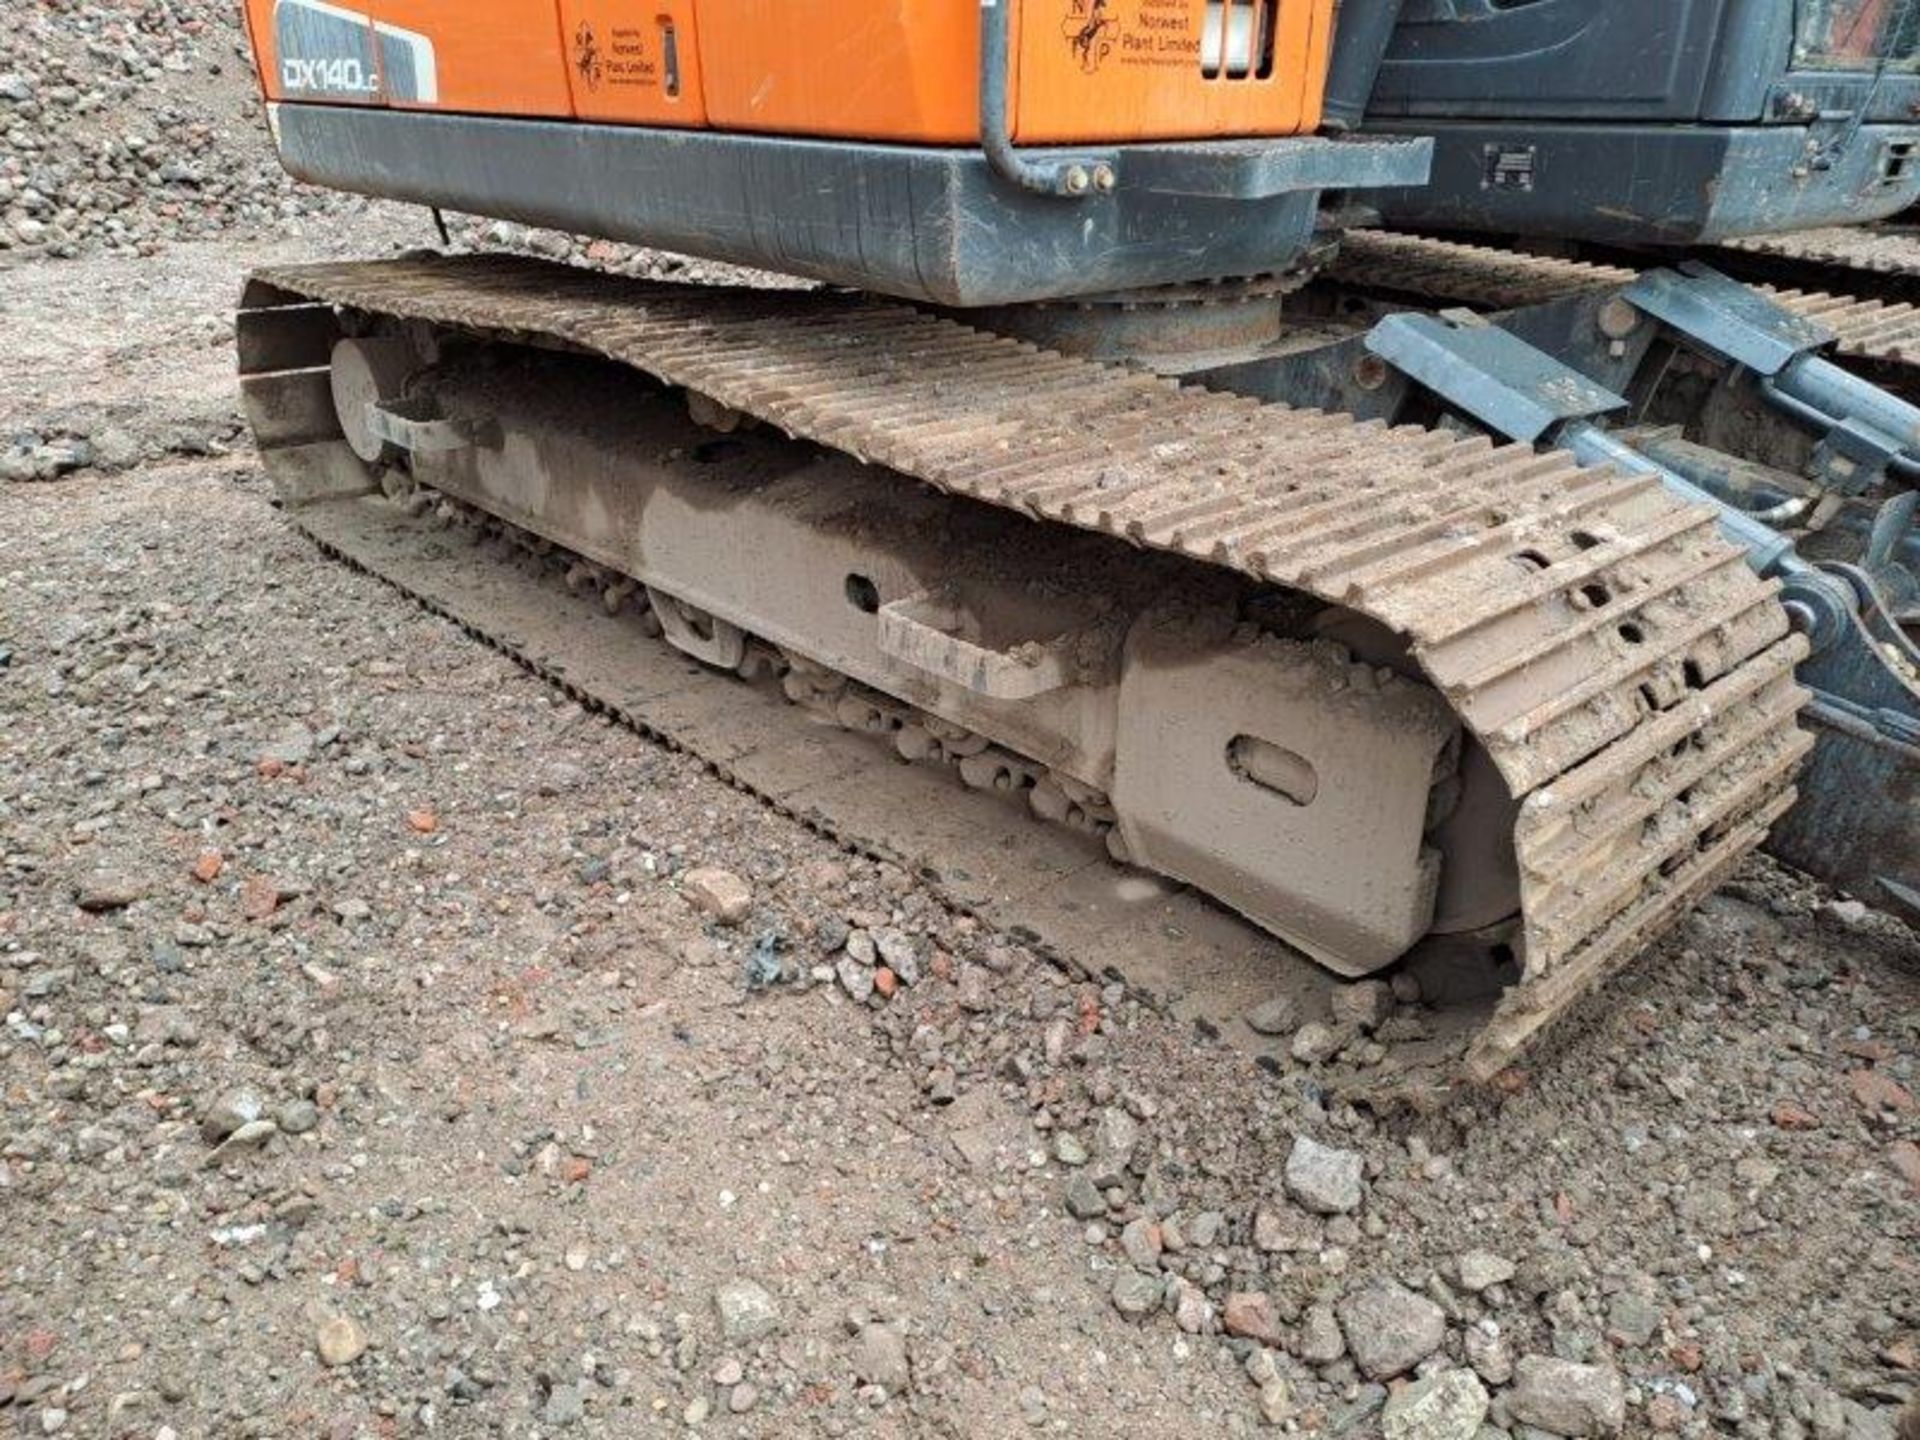 Doosan DX140LC-5 14t excavator, serial no. DHKCEBBRCG0001308, Year: 2017, Hours: 6,670, Key: 1, with - Image 11 of 21